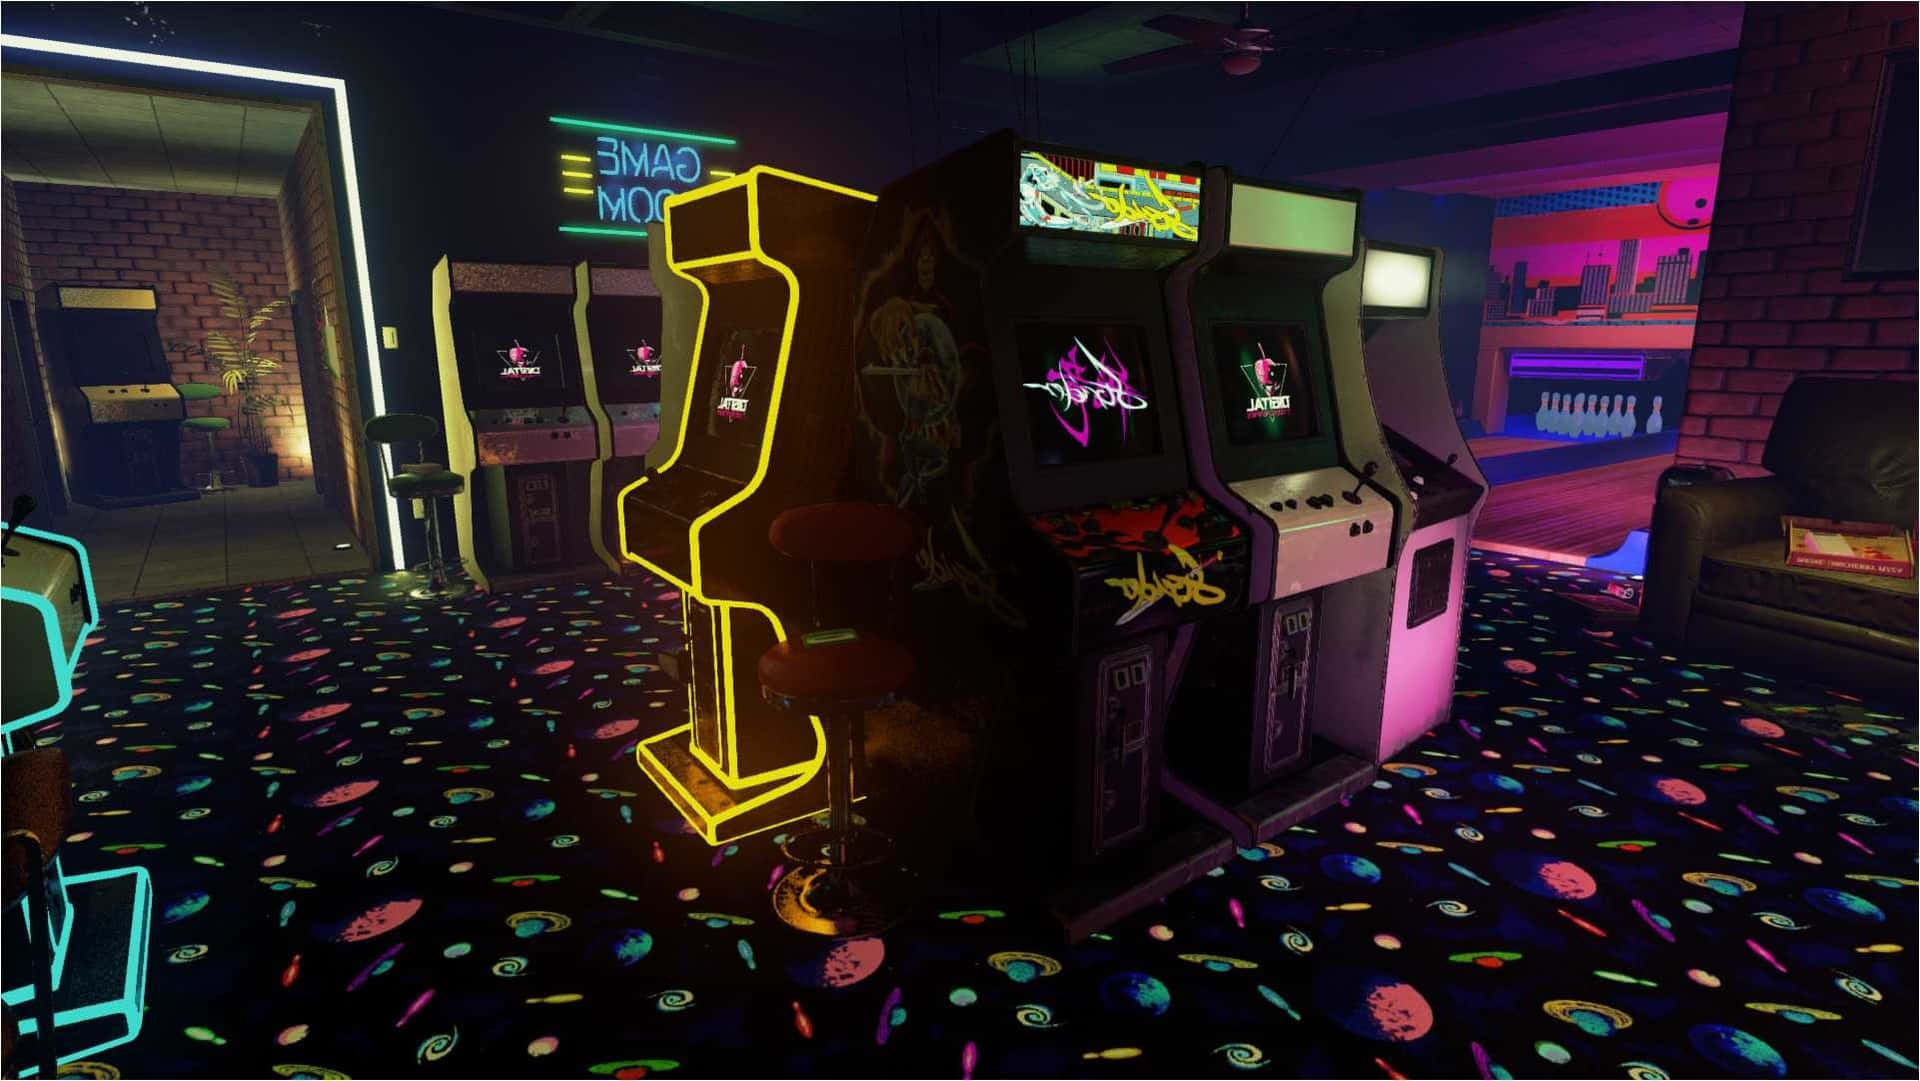 An exciting vision of nostalgia, this 80s retro arcade makes for the perfect throwback experience. Wallpaper